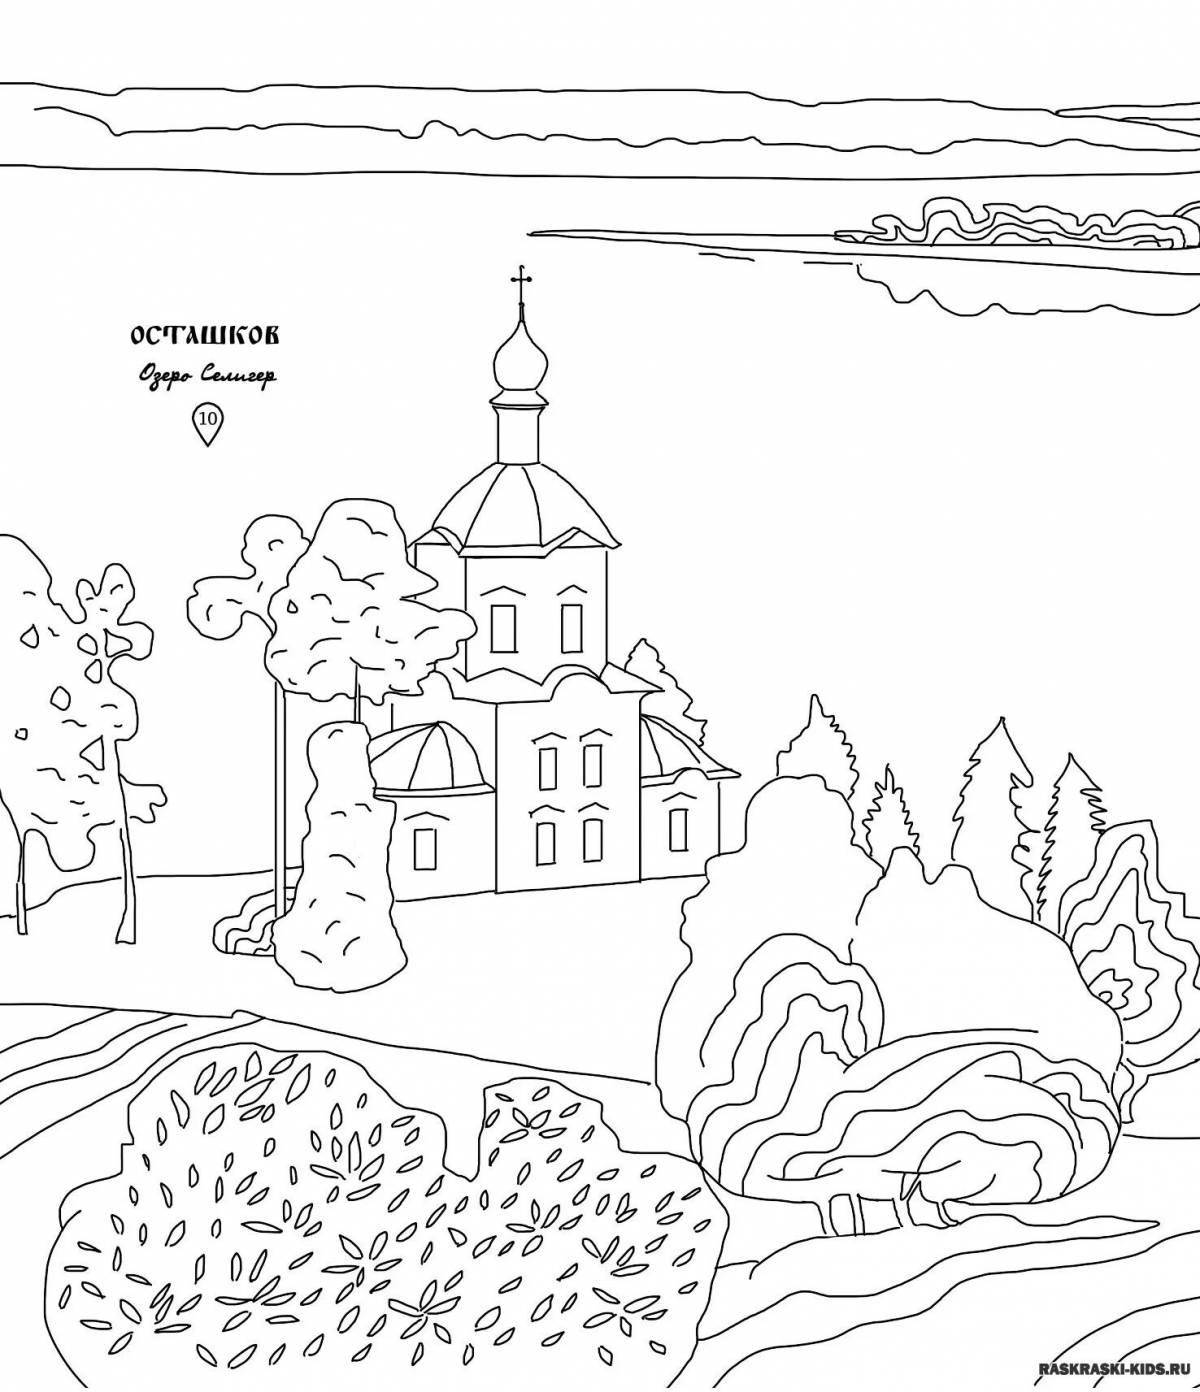 Glorious russia coloring page